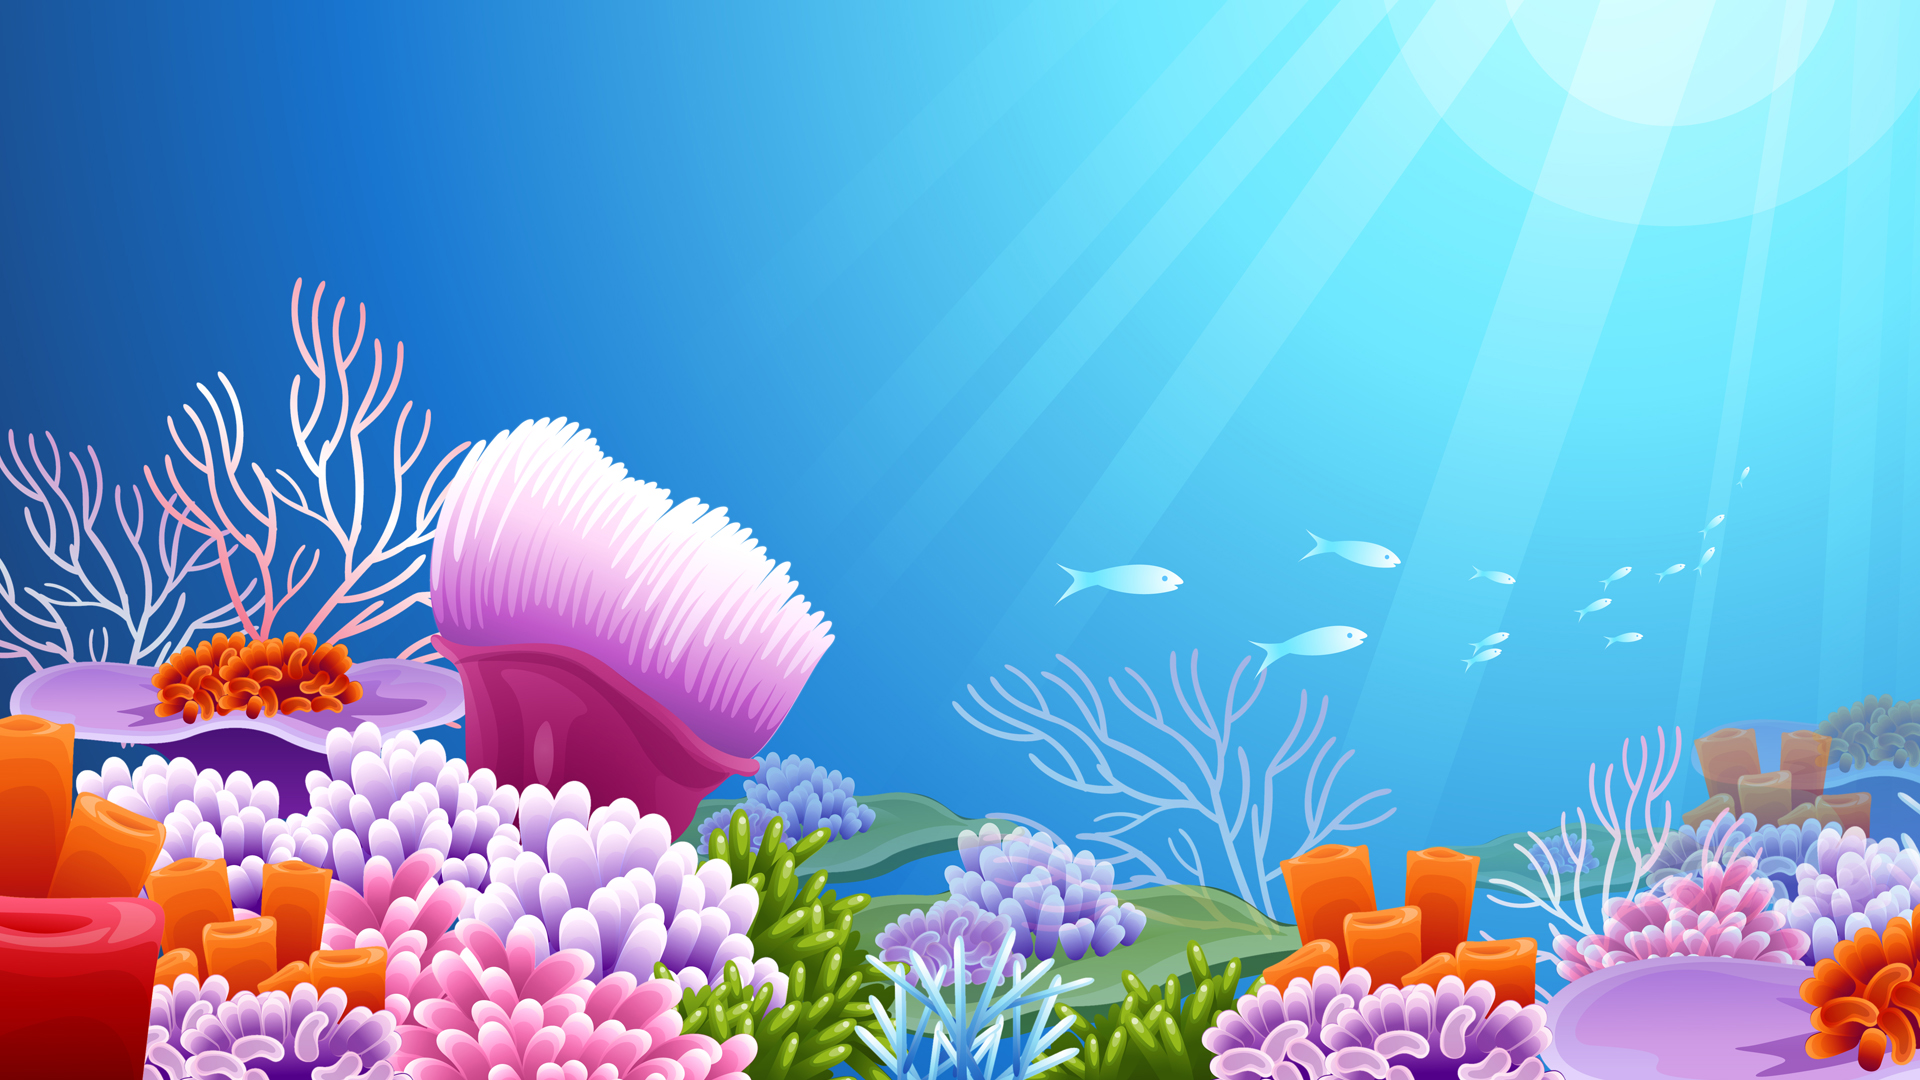 The best free Aquarium vector images. Download from 66 free vectors of